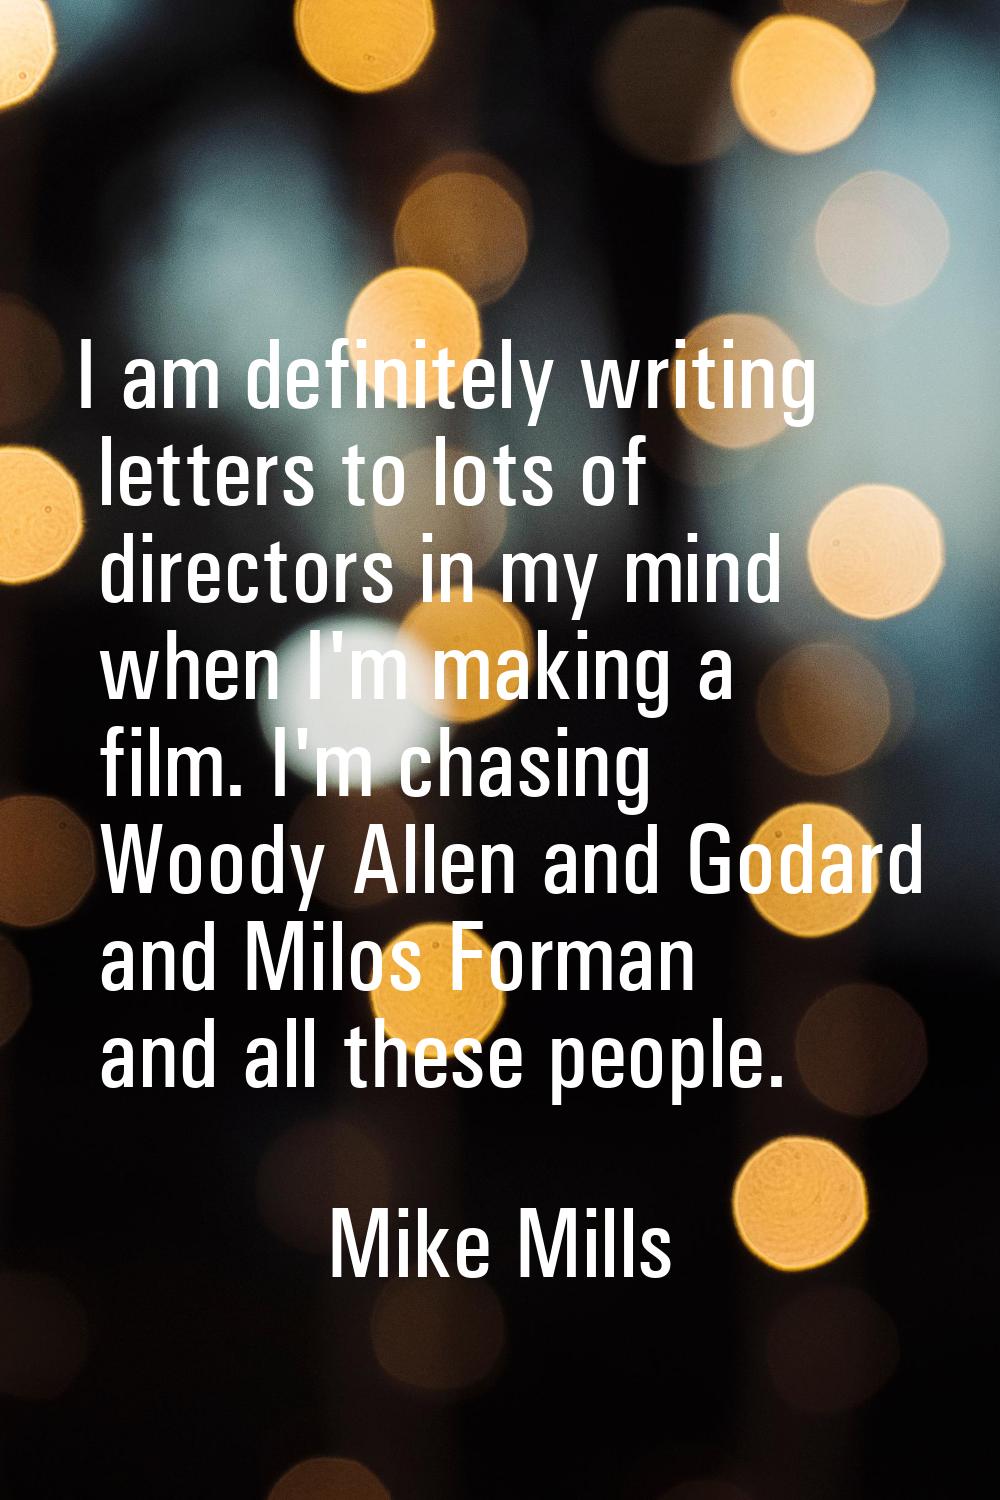 I am definitely writing letters to lots of directors in my mind when I'm making a film. I'm chasing